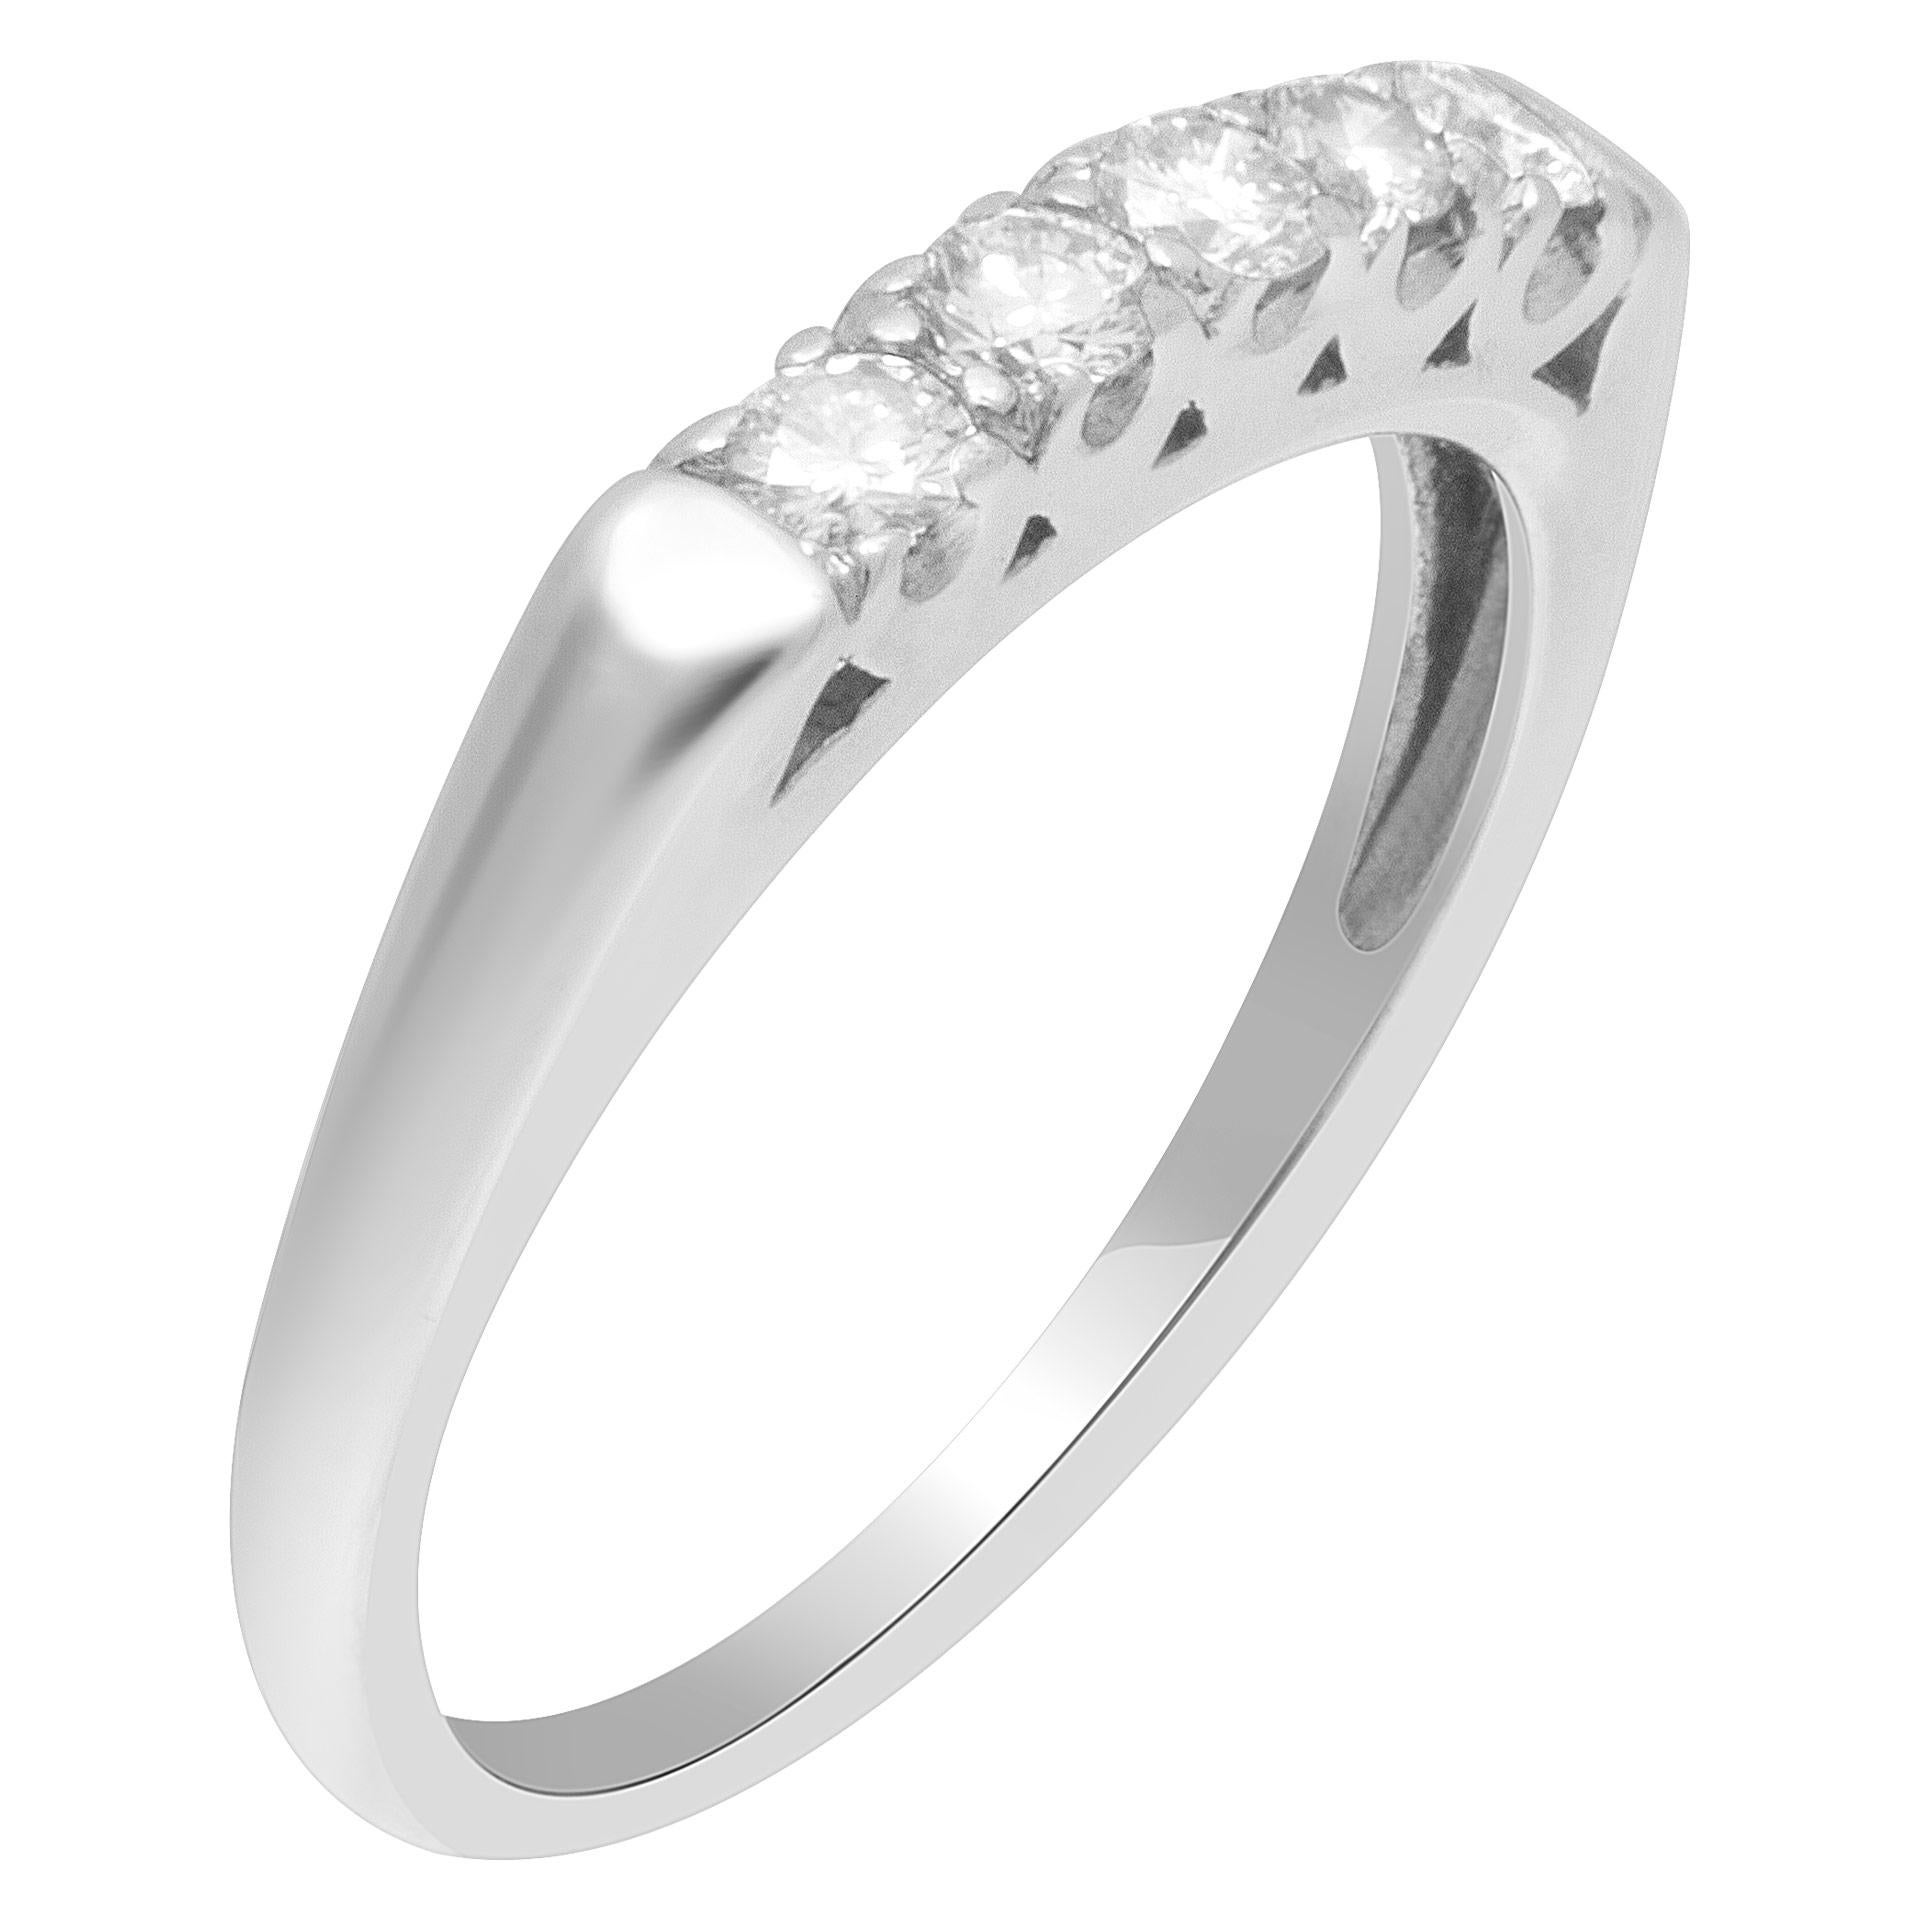 Diamond ring with 5 round diamonds in 18k white gold. Size 6.

This Diamond ring is currently size 6 and some items can be sized up or down, please ask! It weighs 2 pennyweights and is 18k White Gold.